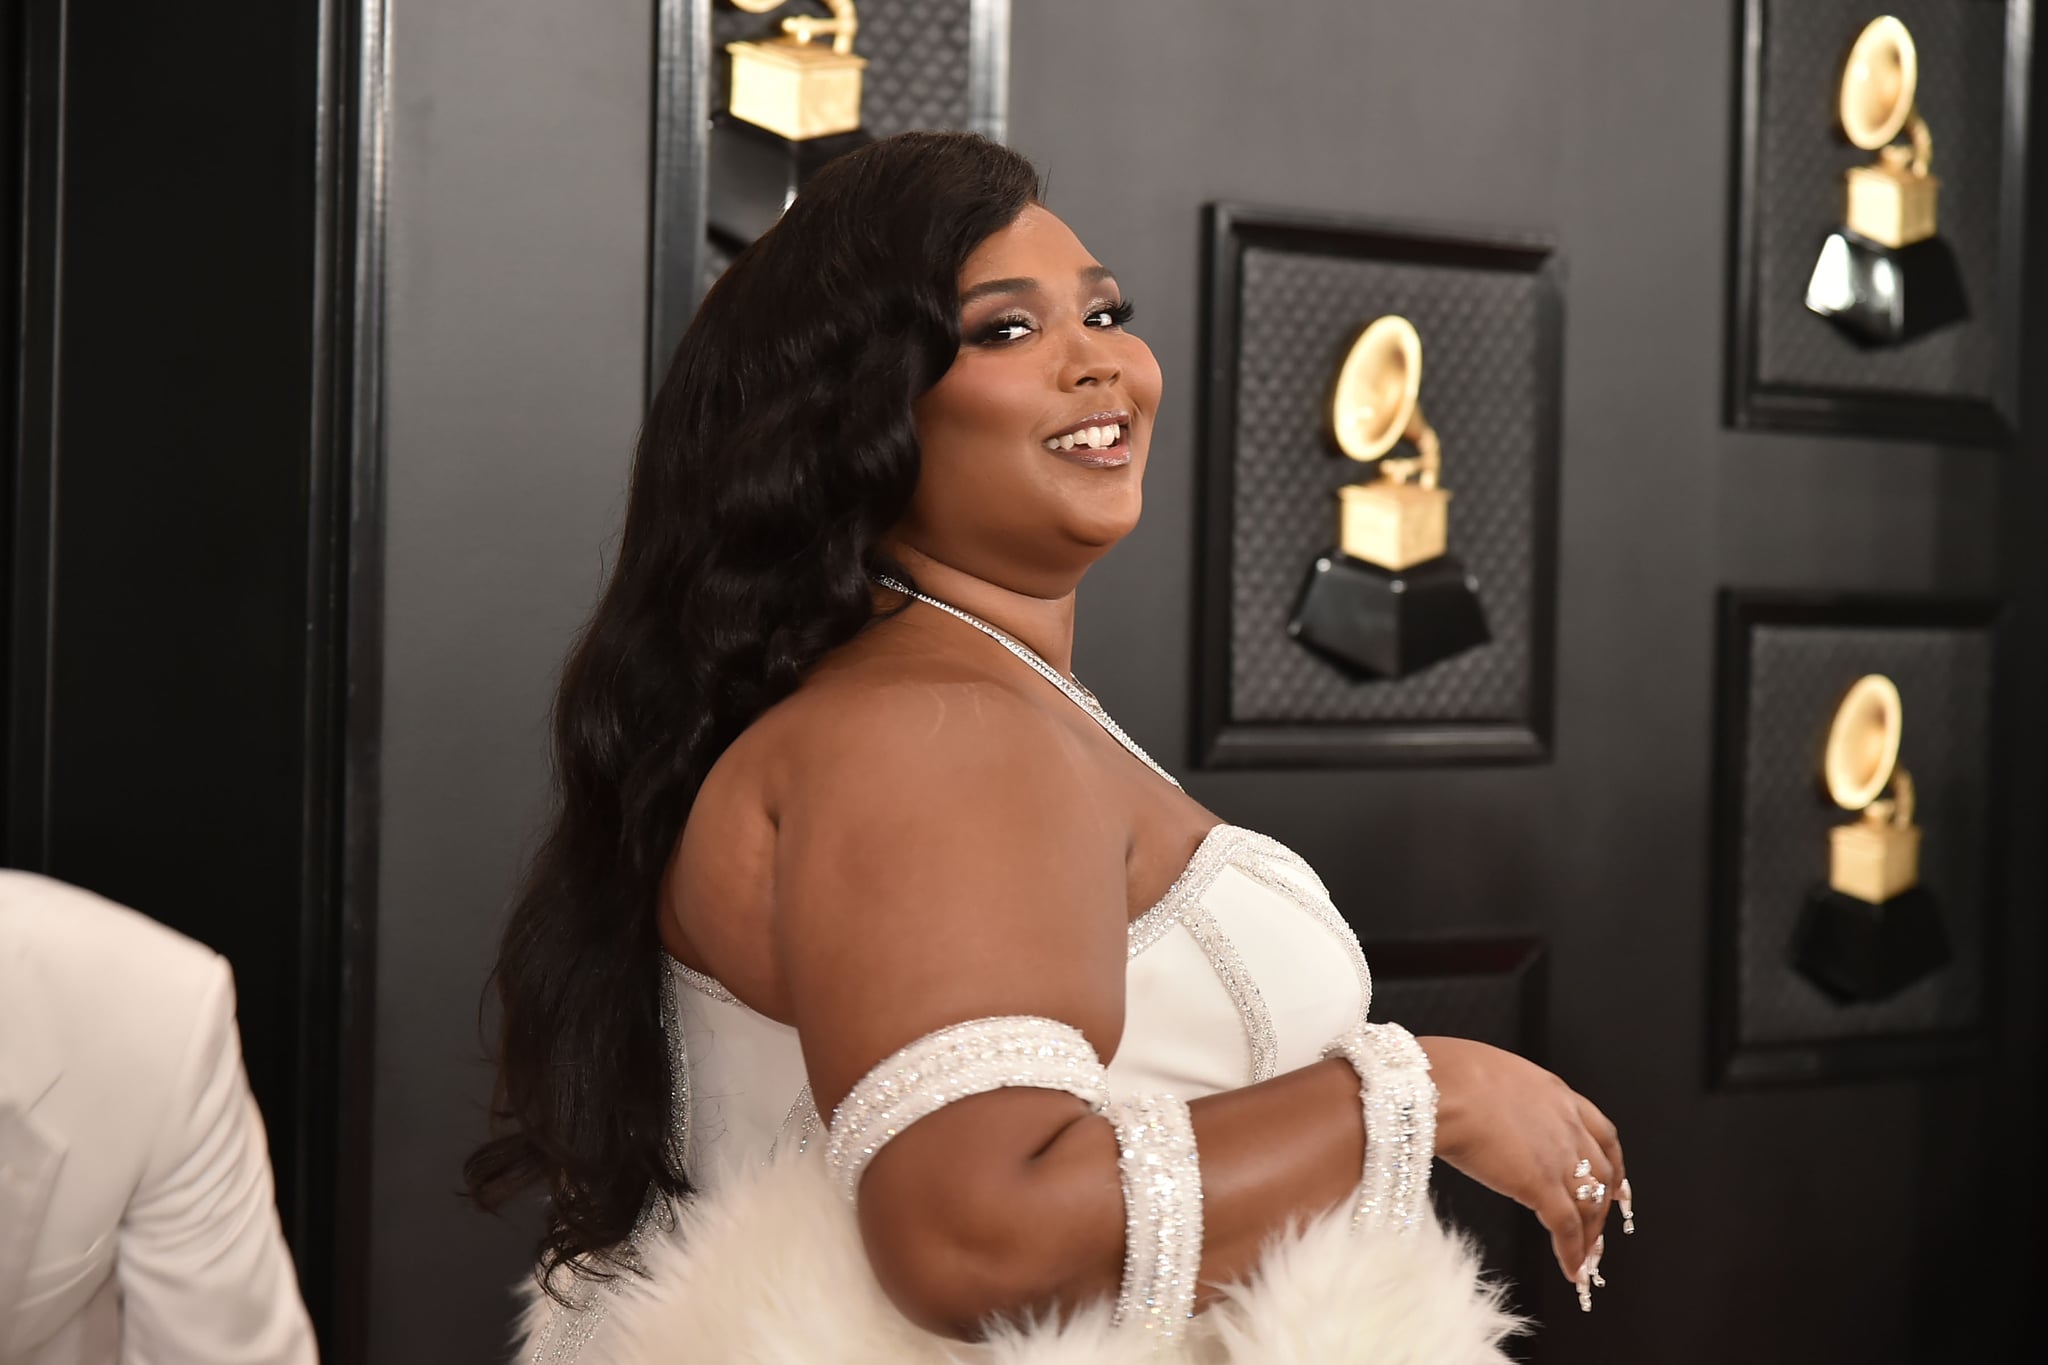 LOS ANGELES, CA - JANUARY 26: Lizzo attends the 62nd Annual Grammy Awards at Staples Center on January 26, 2020 in Los Angeles, CA. (Photo by David Crotty/Patrick McMullan via Getty Images)